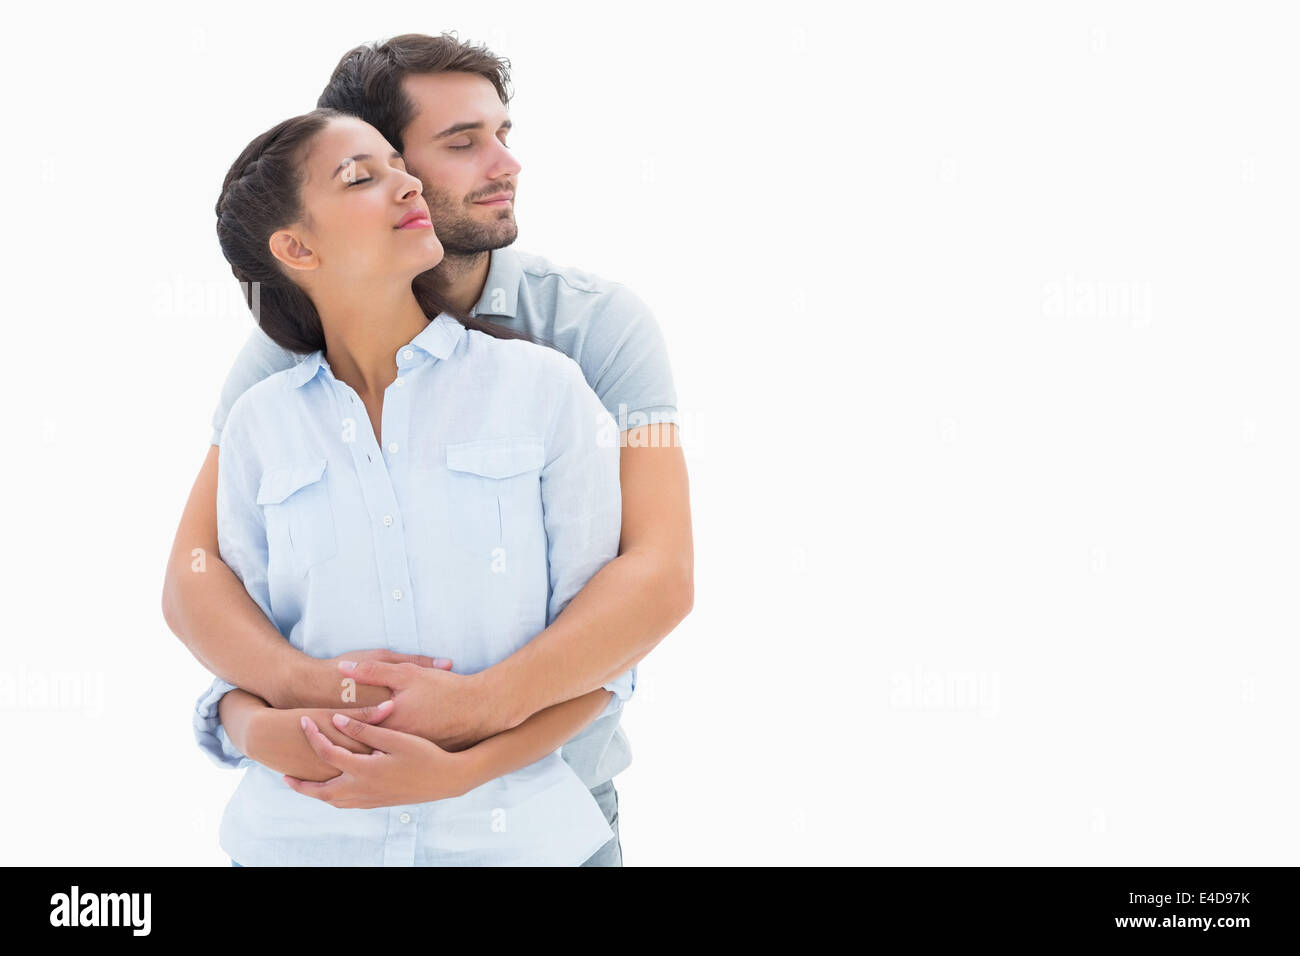 Cute couple embracing with eyes closed Stock Photo